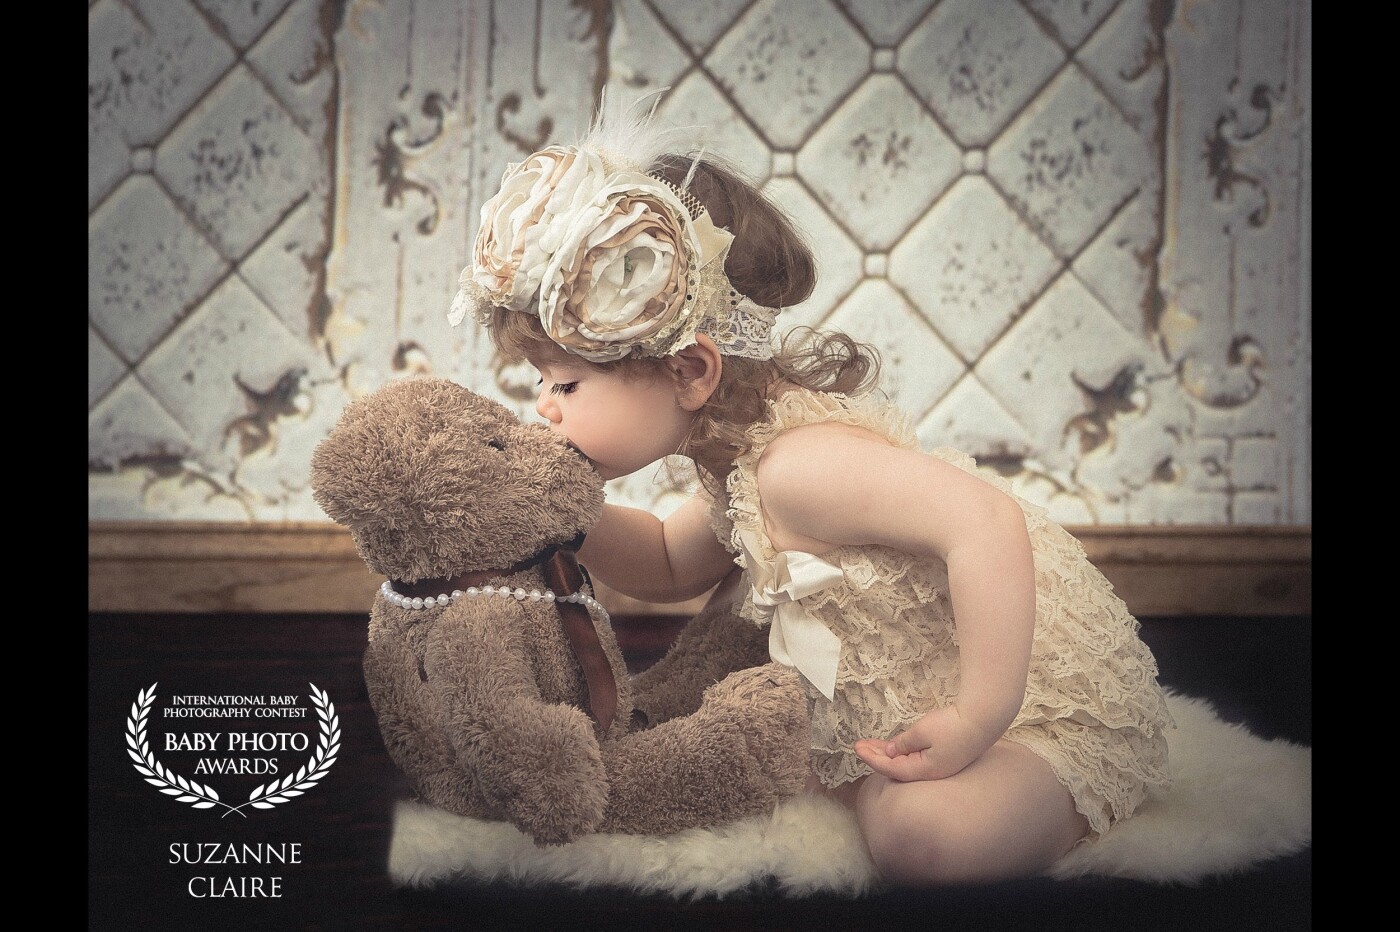 This adorable little girls photo was taken in my home studio with my Profoto lighting system. This was one of my favorite clients daughters two-year-old birthday pictures. <br />
We had so much fun playing dress up with this old teddy bear. I love capturing the innocence of a child.